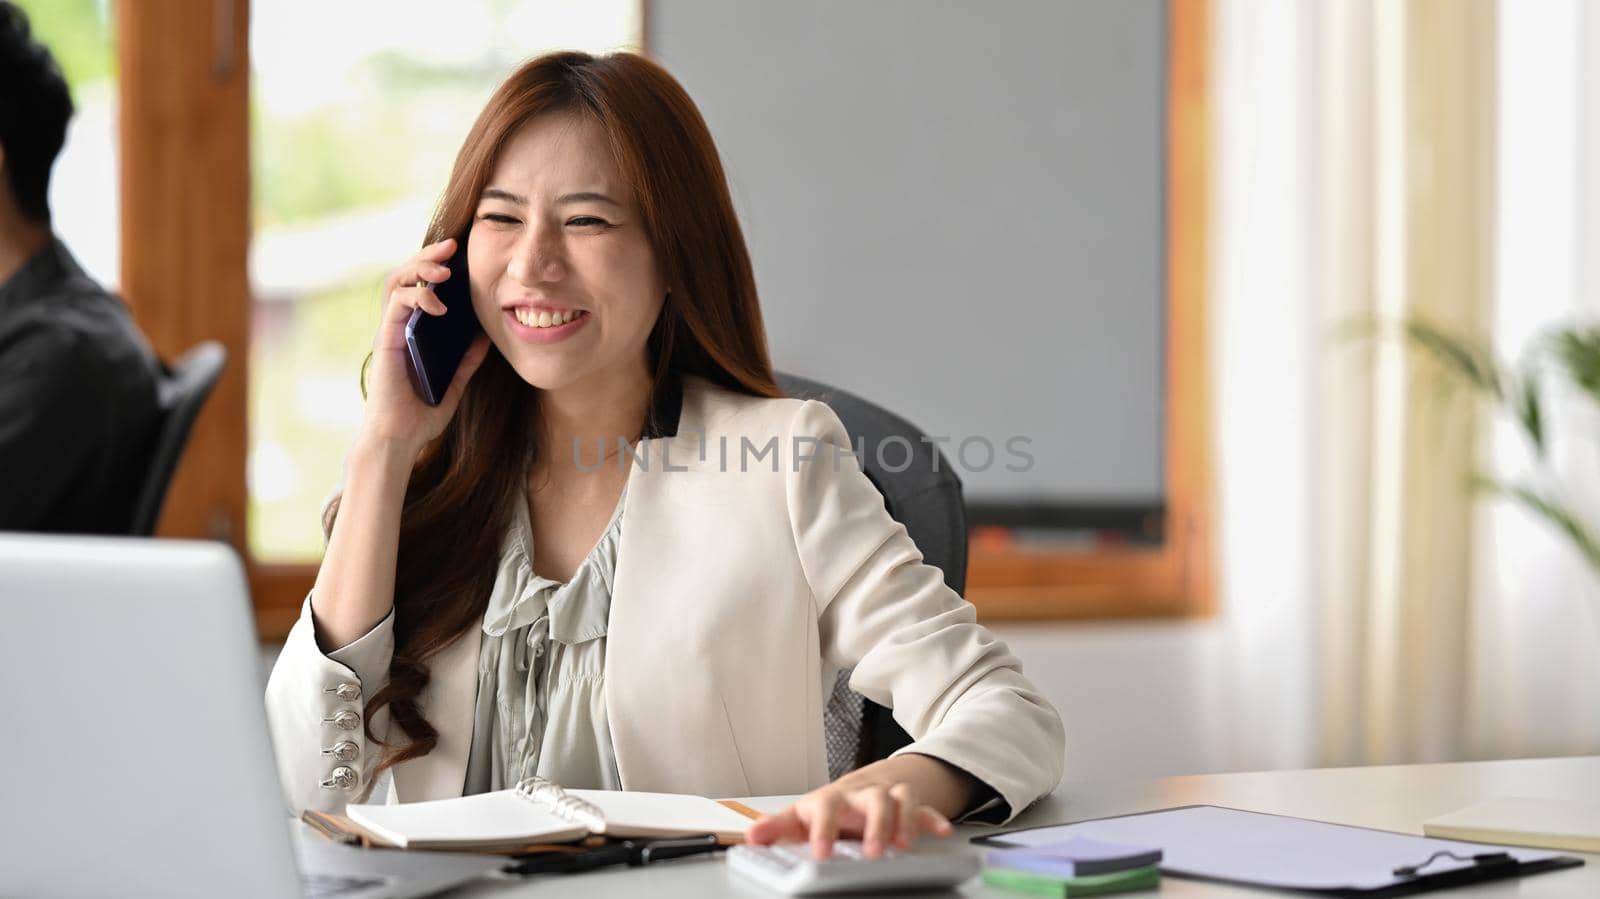 Successful millennial businesswoman sitting at her workplace and negotiating with client on mobile phone by prathanchorruangsak